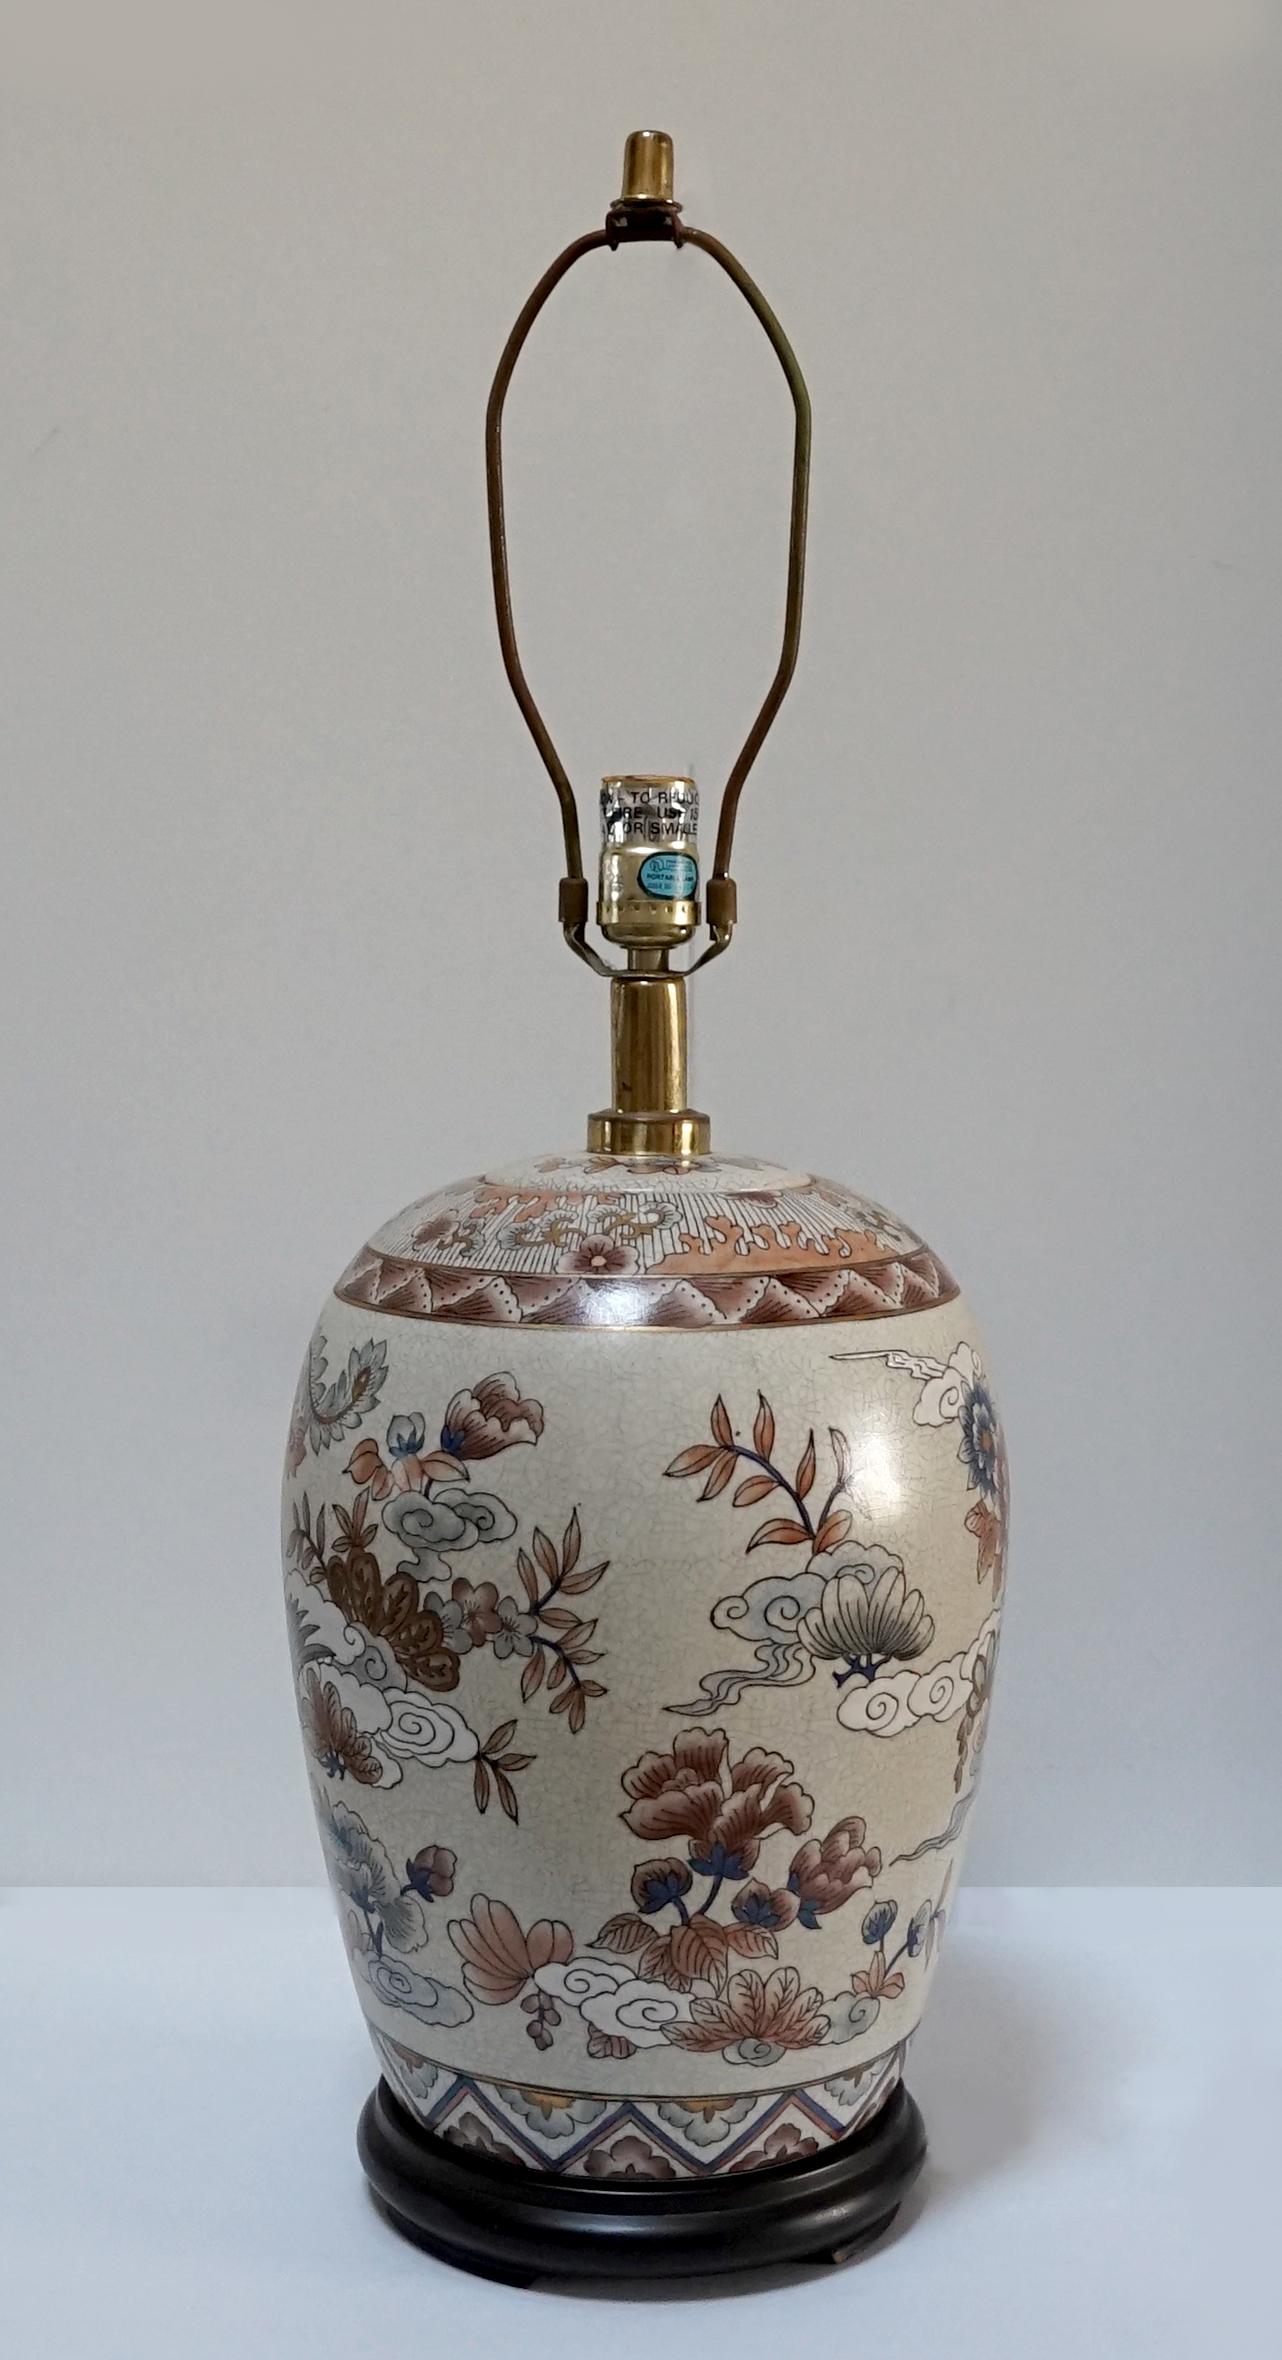 Two geometric bands at the top and near the base of this lamp form an accent for the beautiful profusion of clouds and birds in flight on the background of this lamp. The dominant colors are muted, tan, beige, brown and sky blue. The condition of